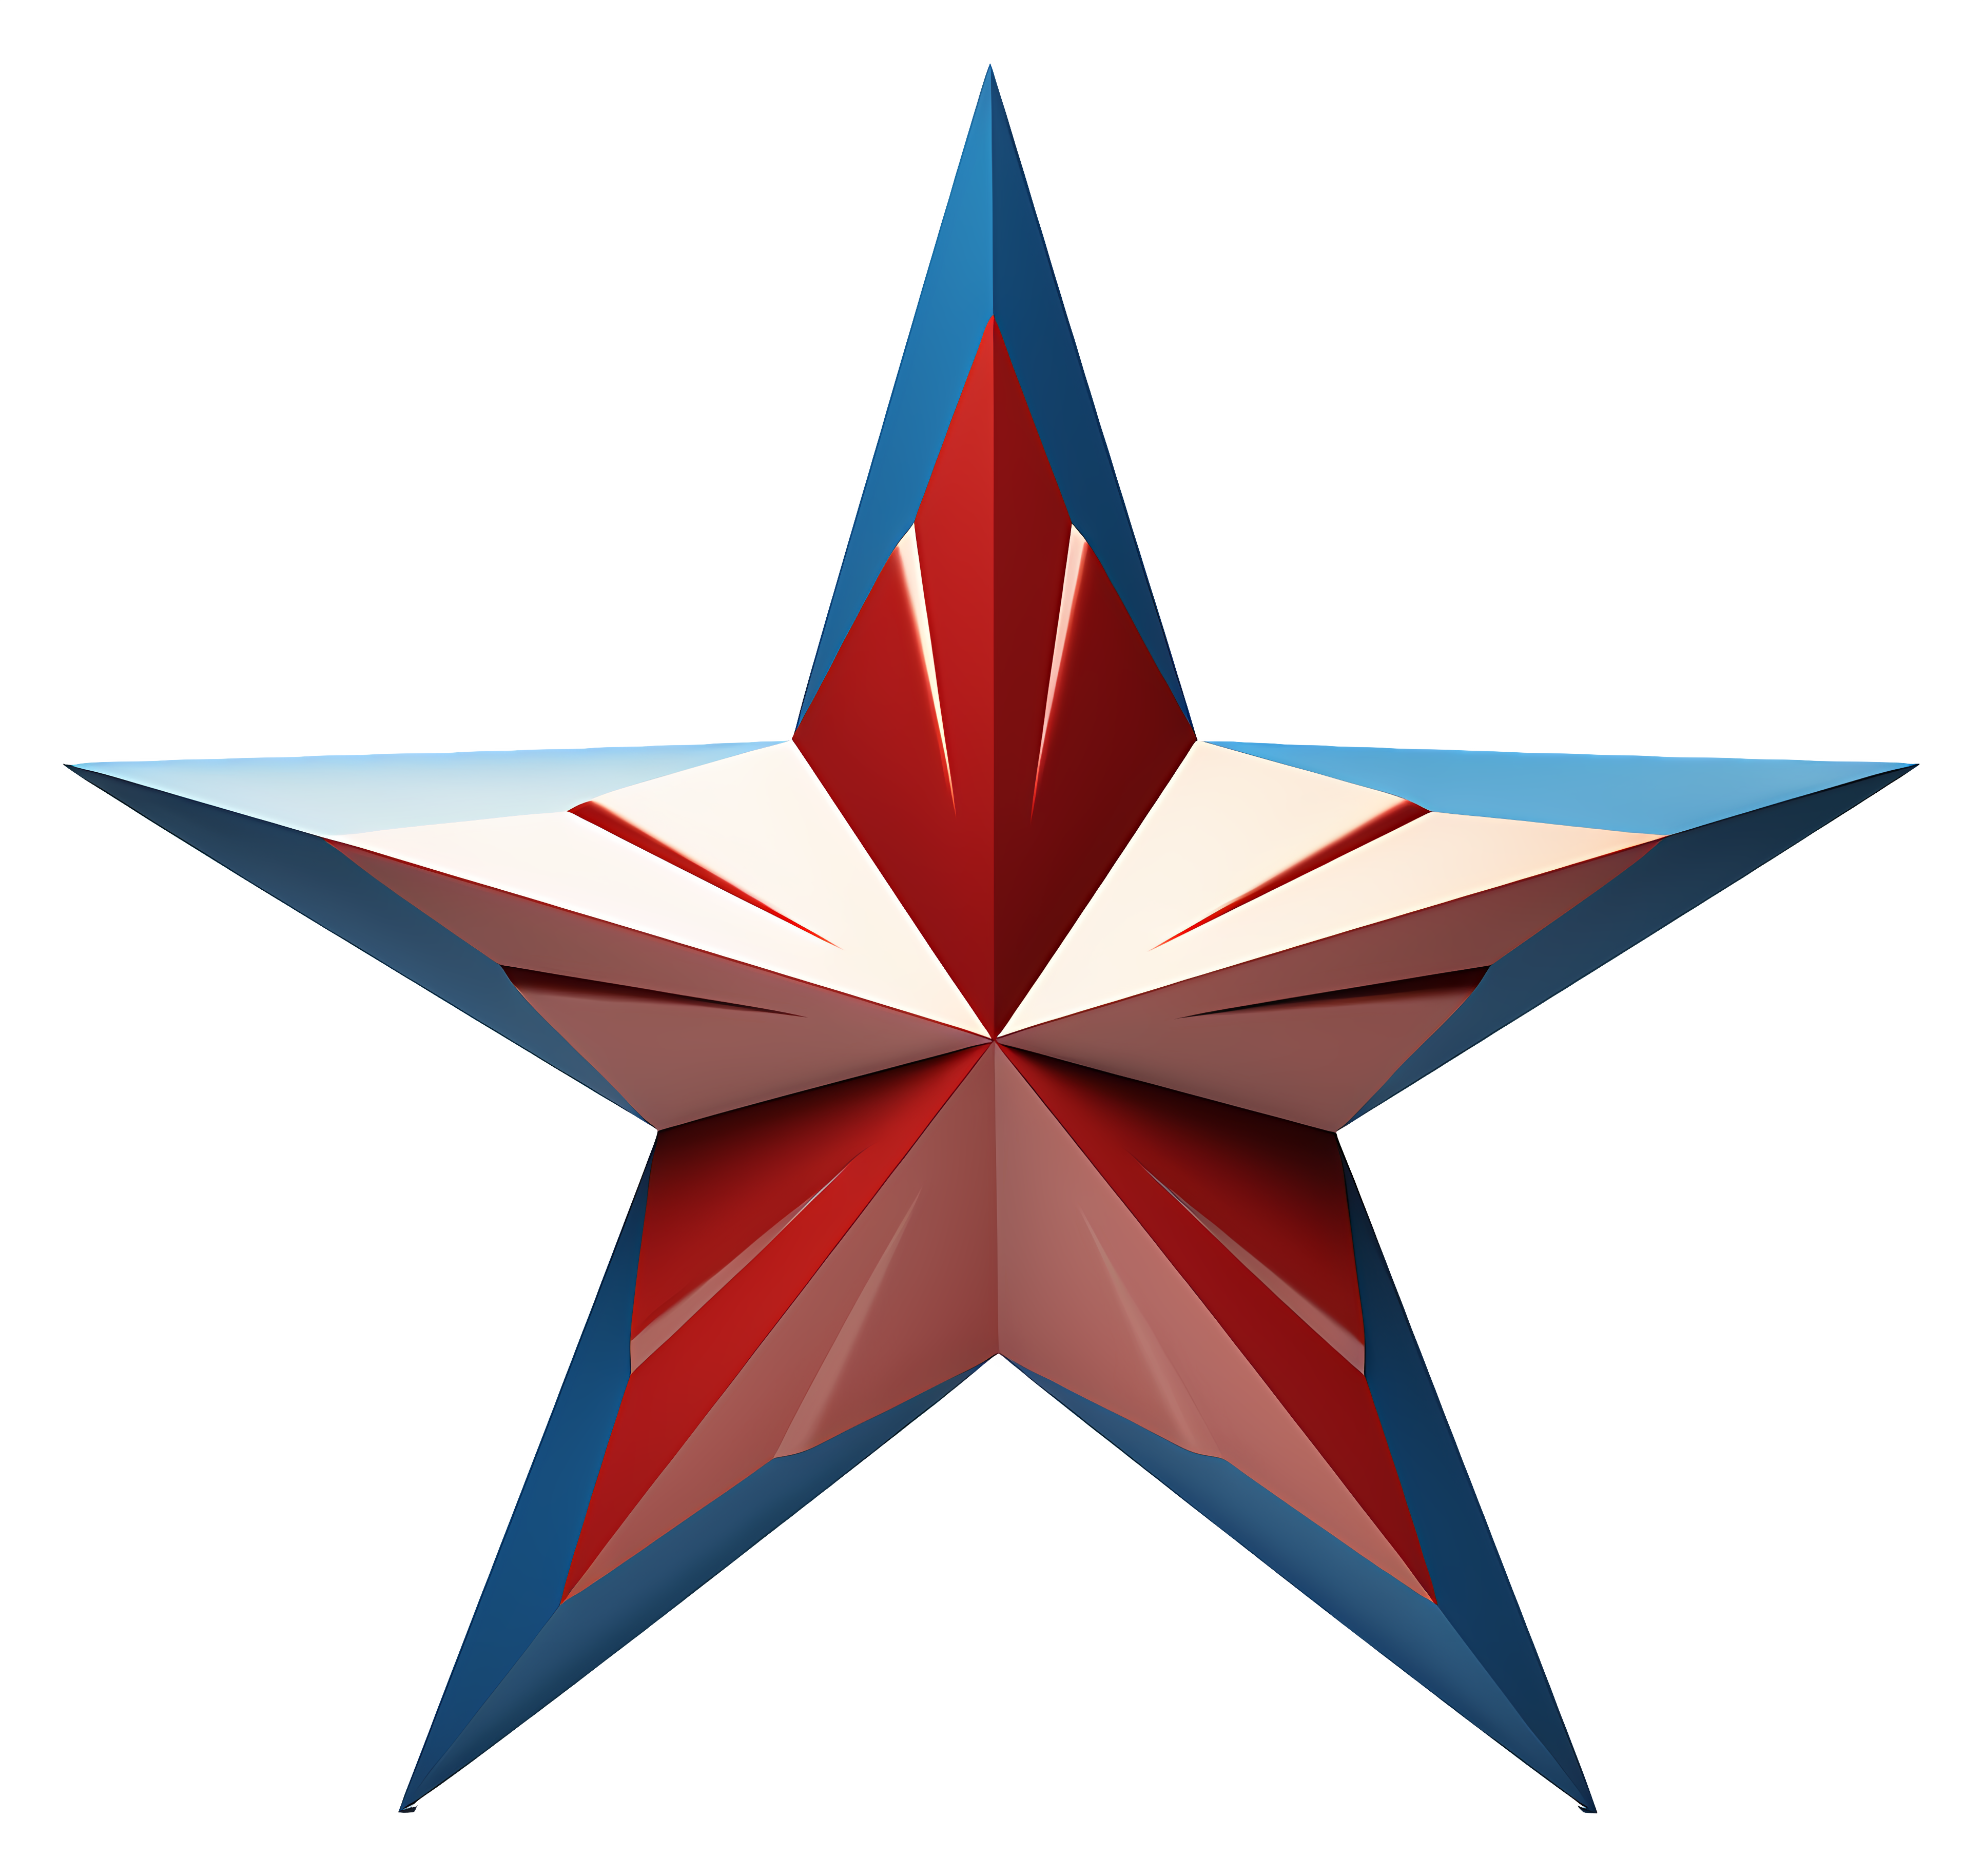 3D star with red, white, and blue colors Clipart